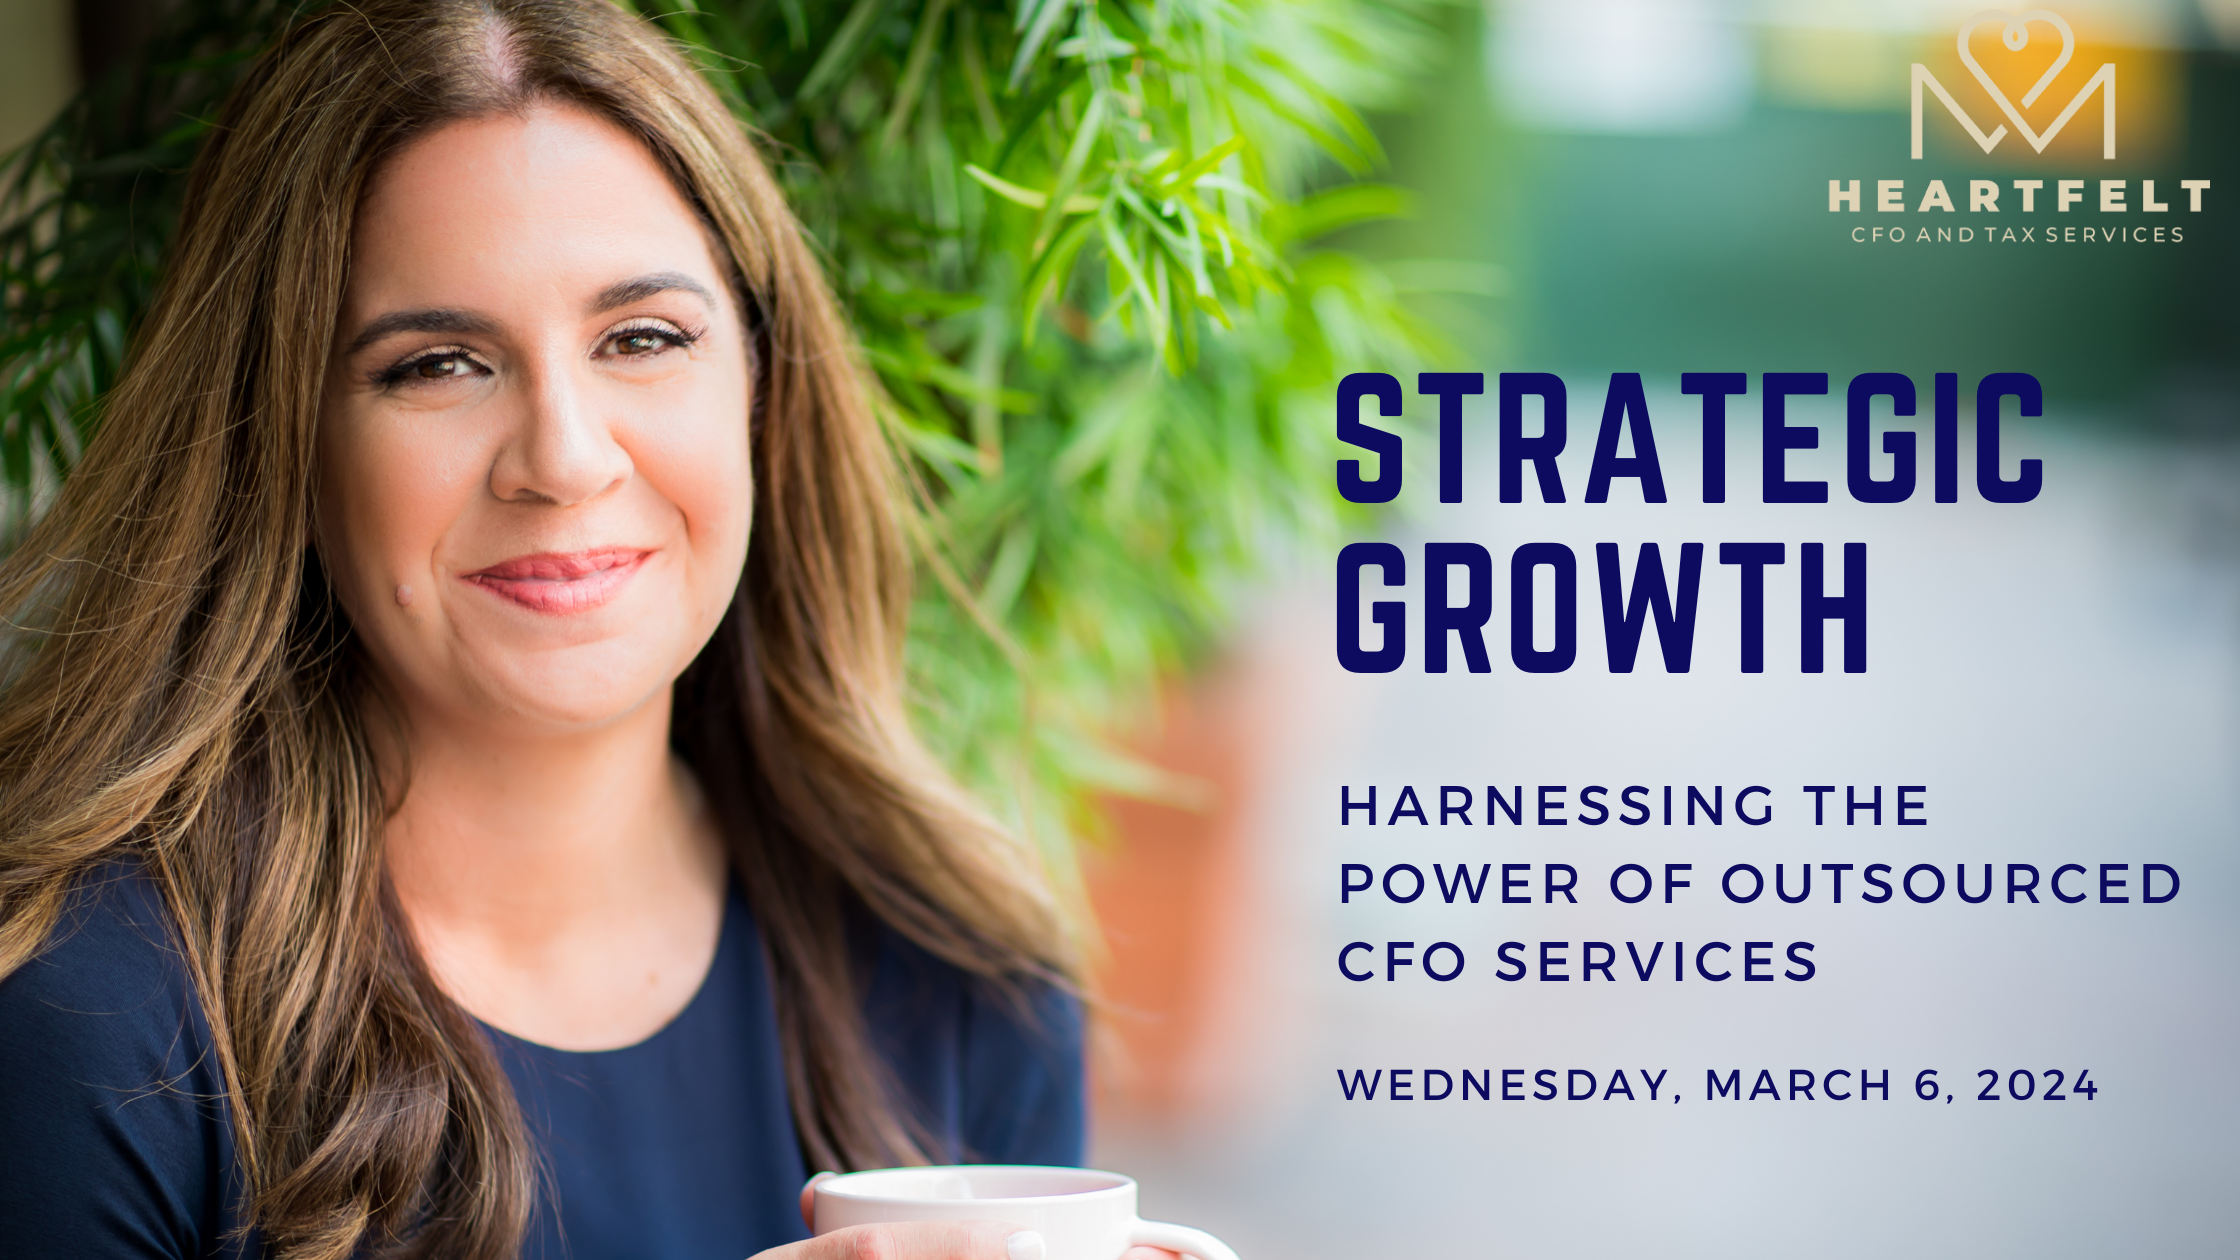 Strategic Growth: Harnessing the Power of Outsourced CFO Services